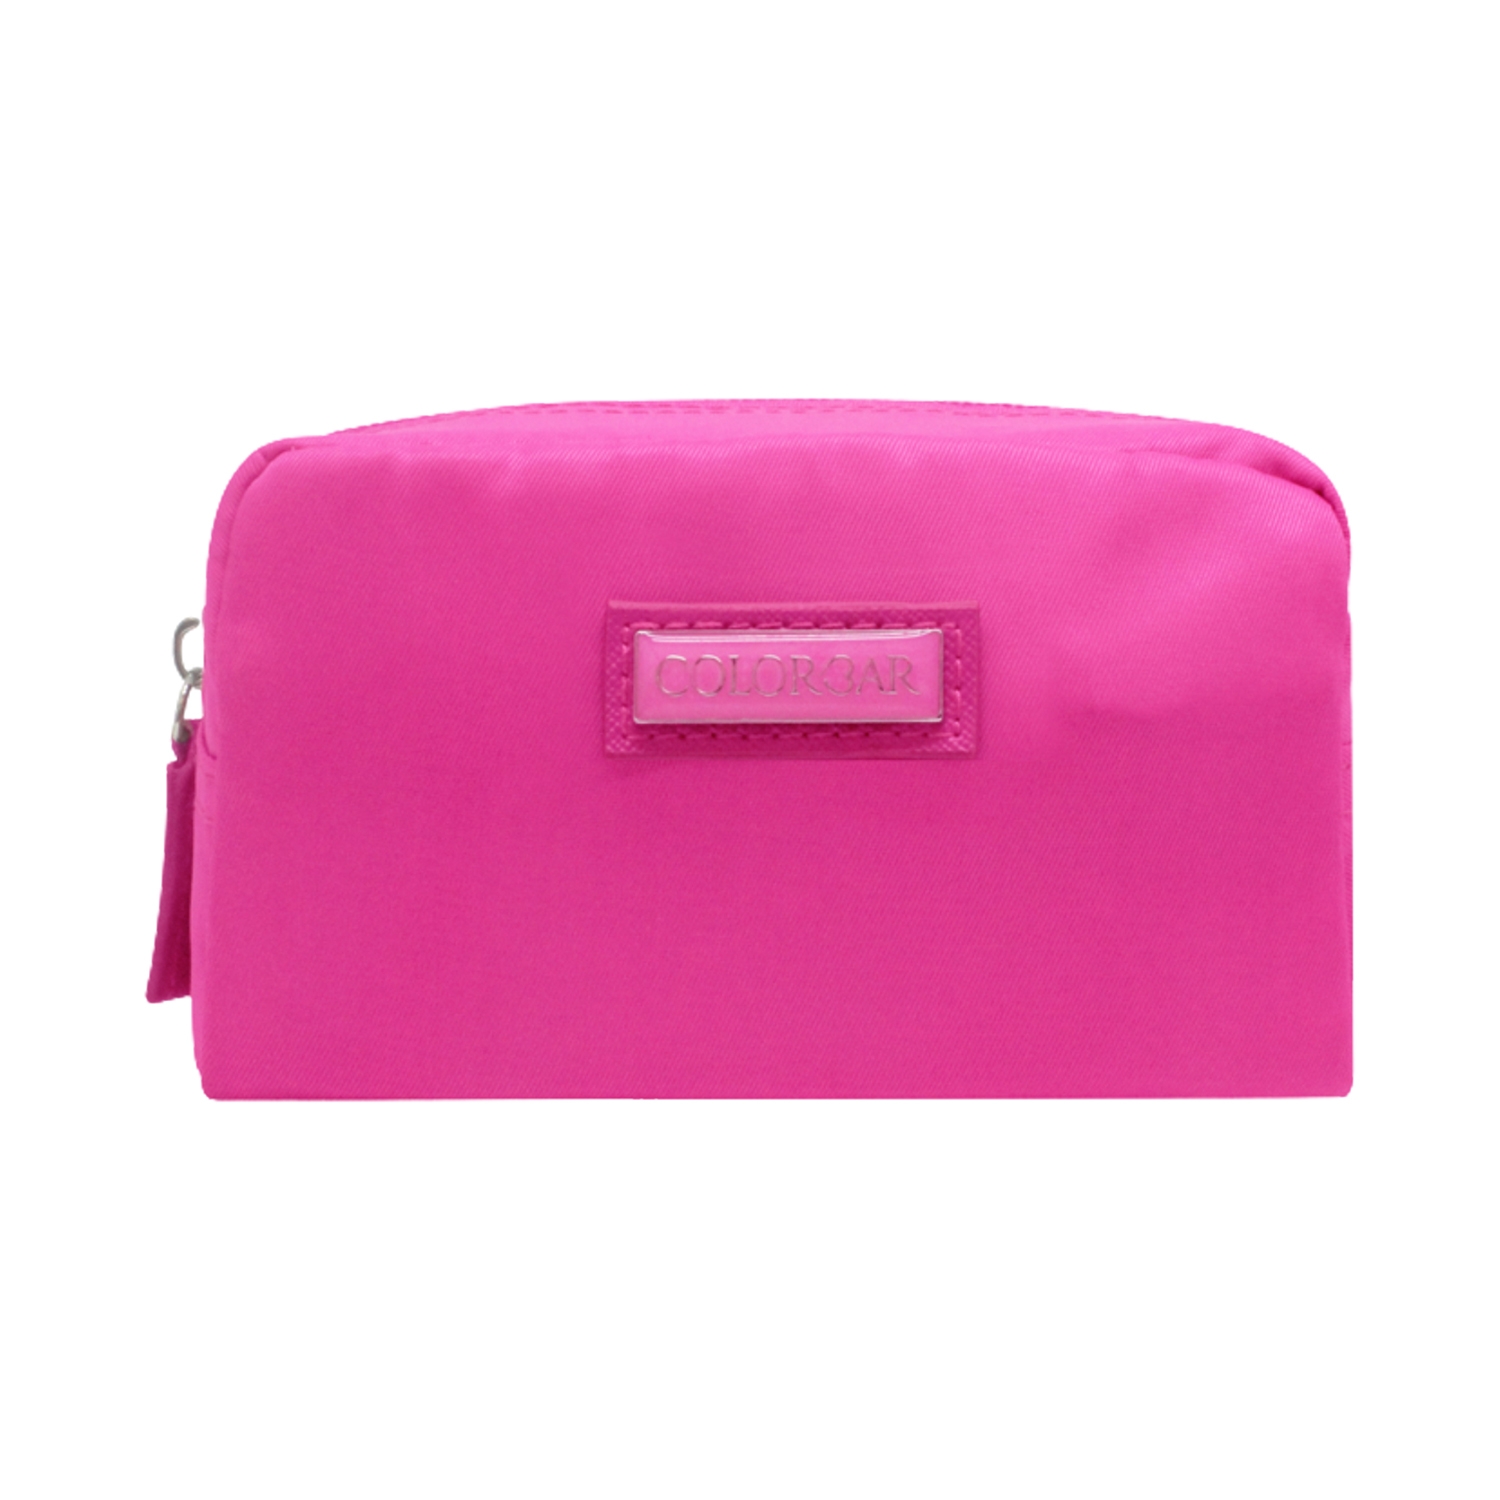 Colorbar | Colorbar Mini Pouch New - Pink